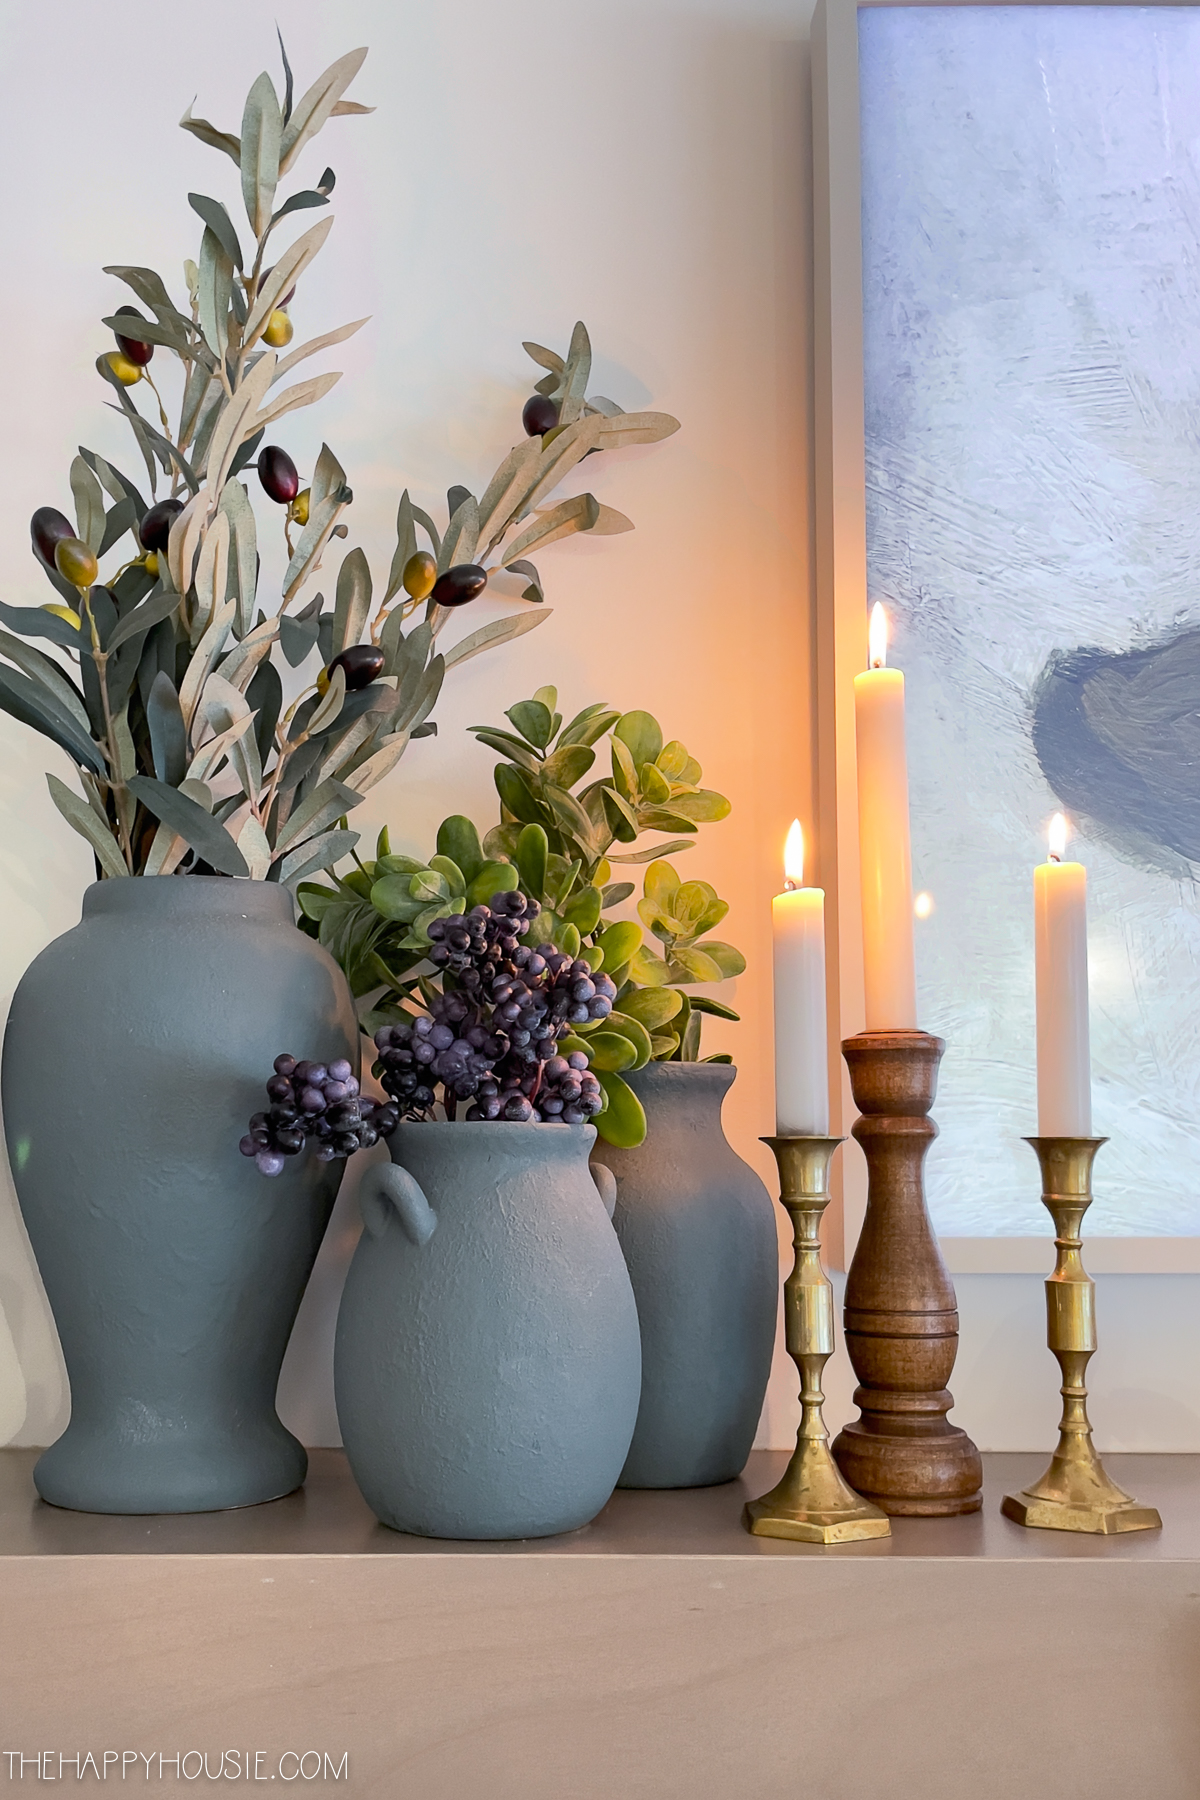 Candles on the mantel beside olive branches.